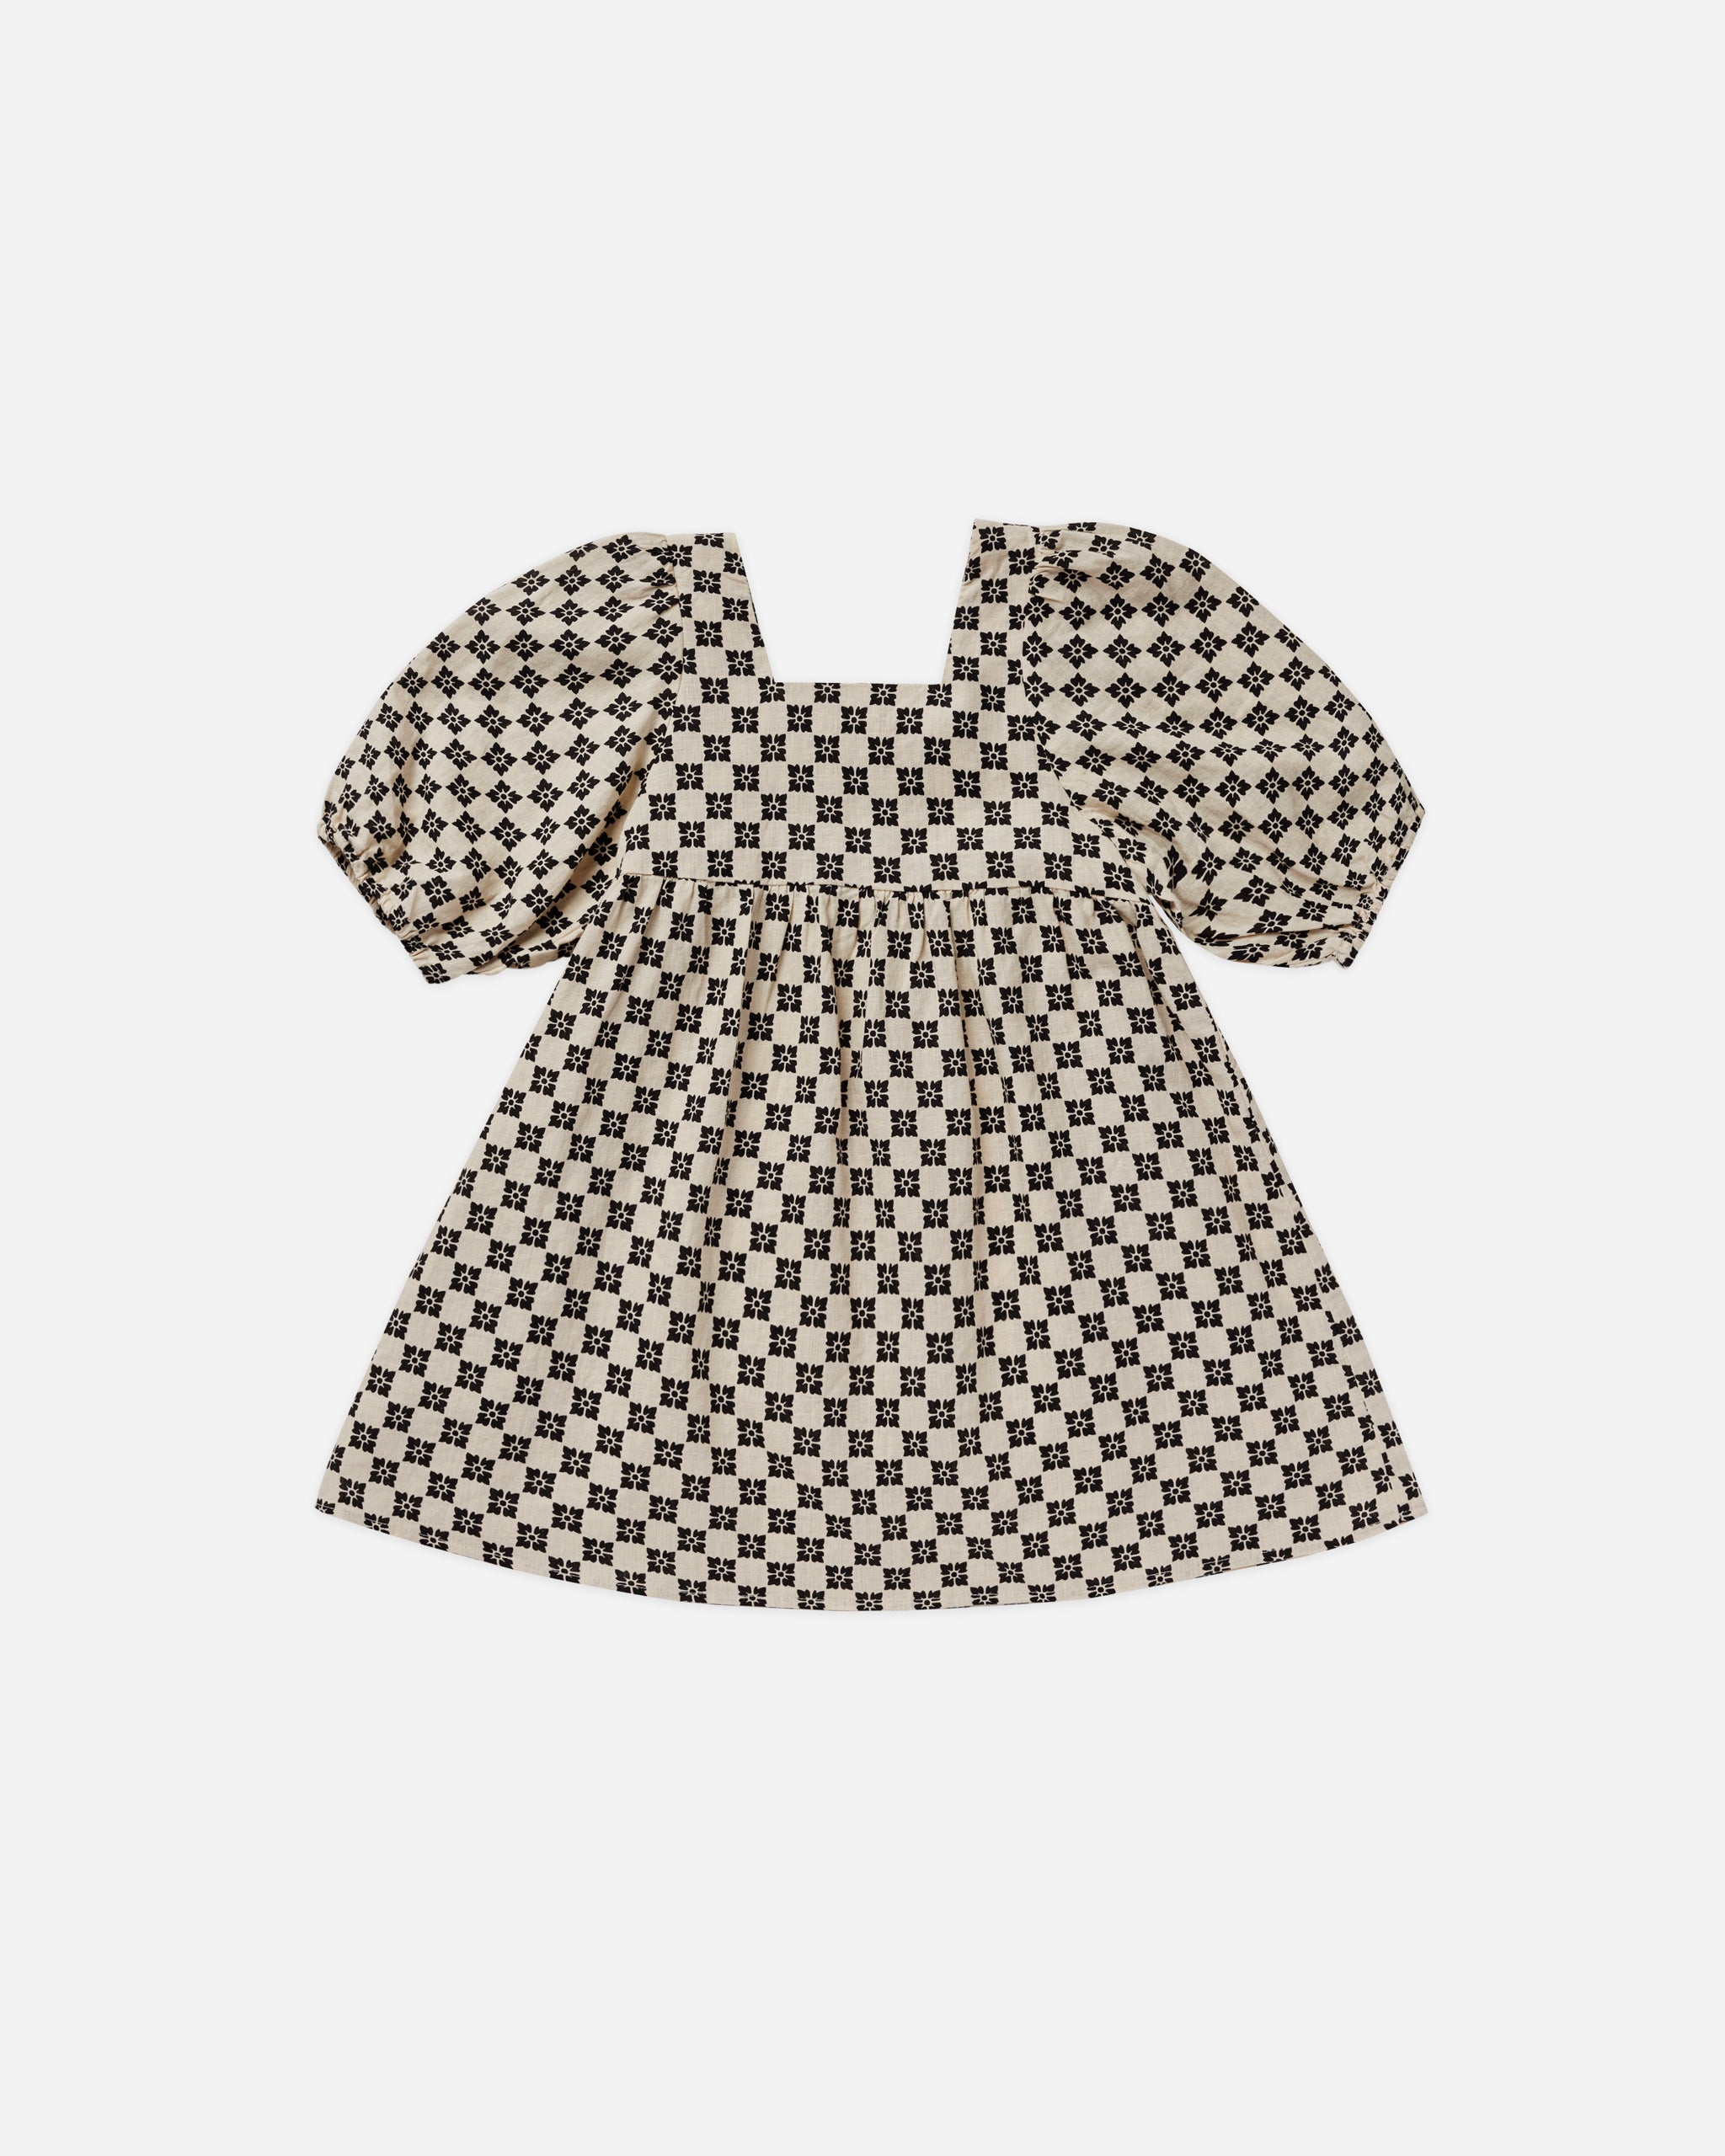 Gretta Babydoll Dress || Flower Check - Rylee + Cru | Kids Clothes | Trendy Baby Clothes | Modern Infant Outfits |